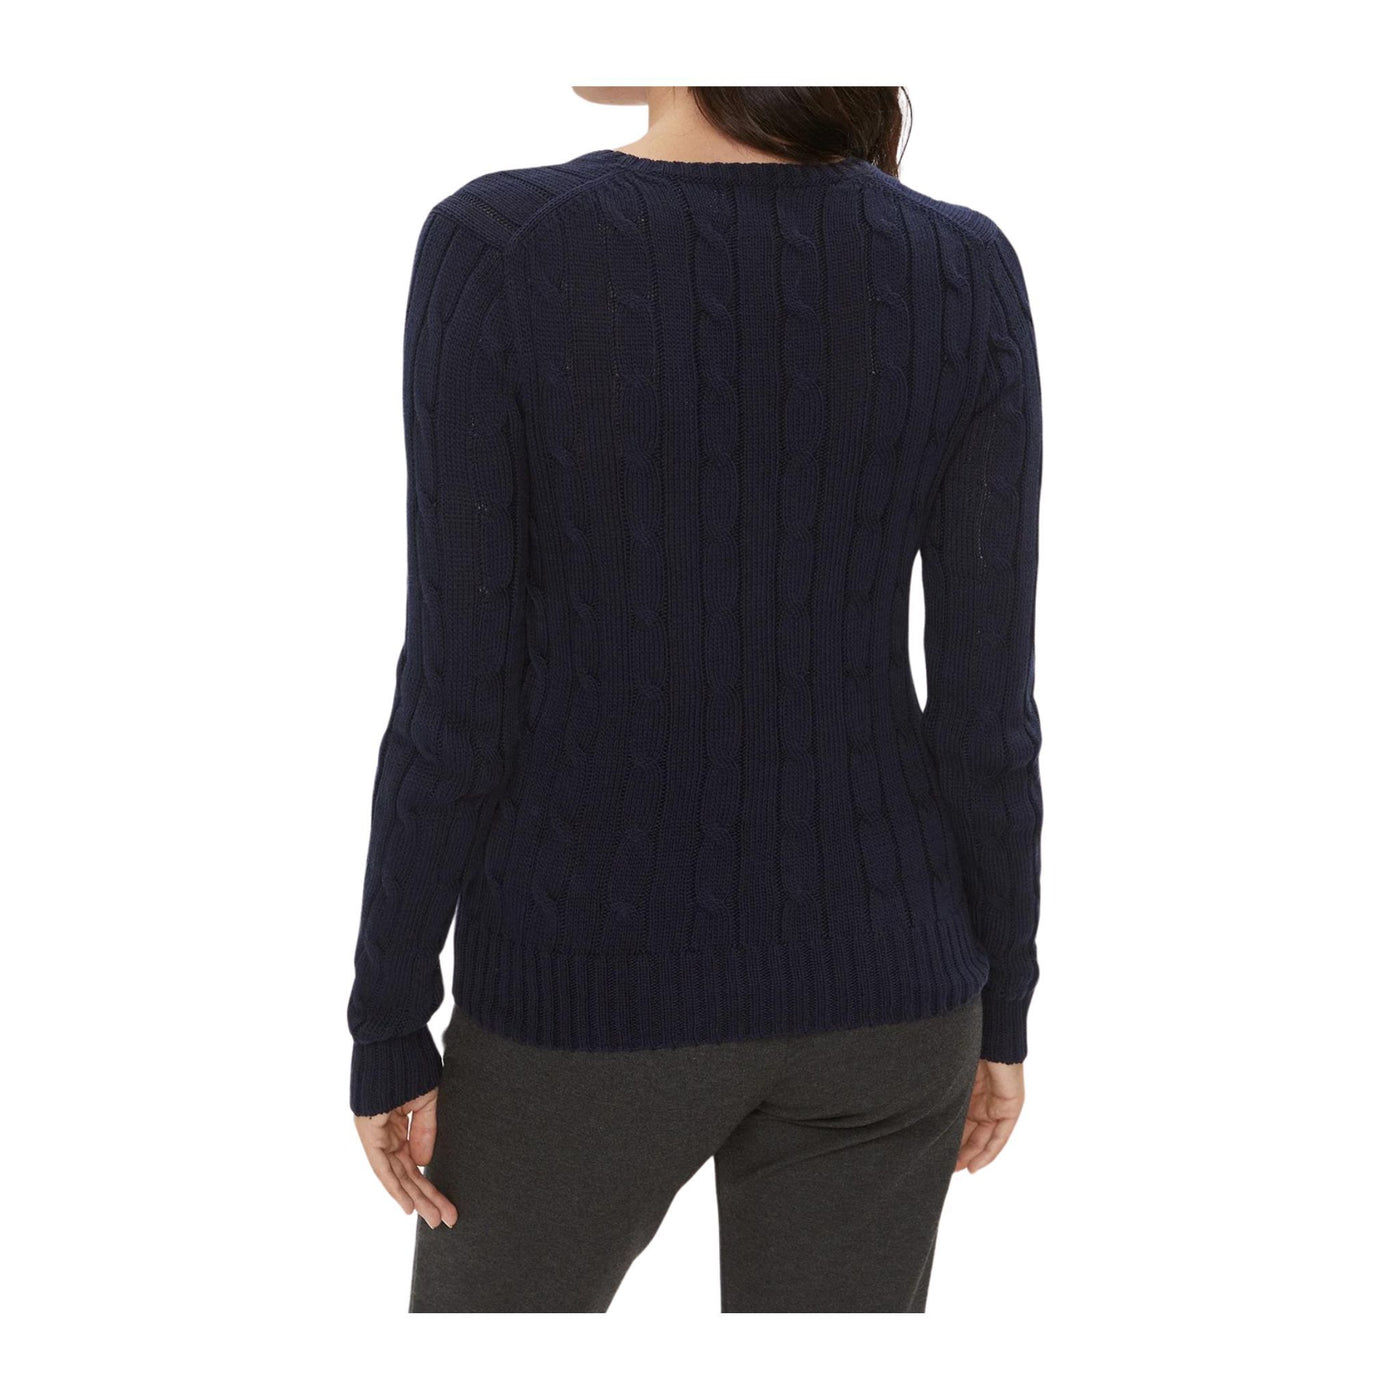 Blue cable-knit women's sweater